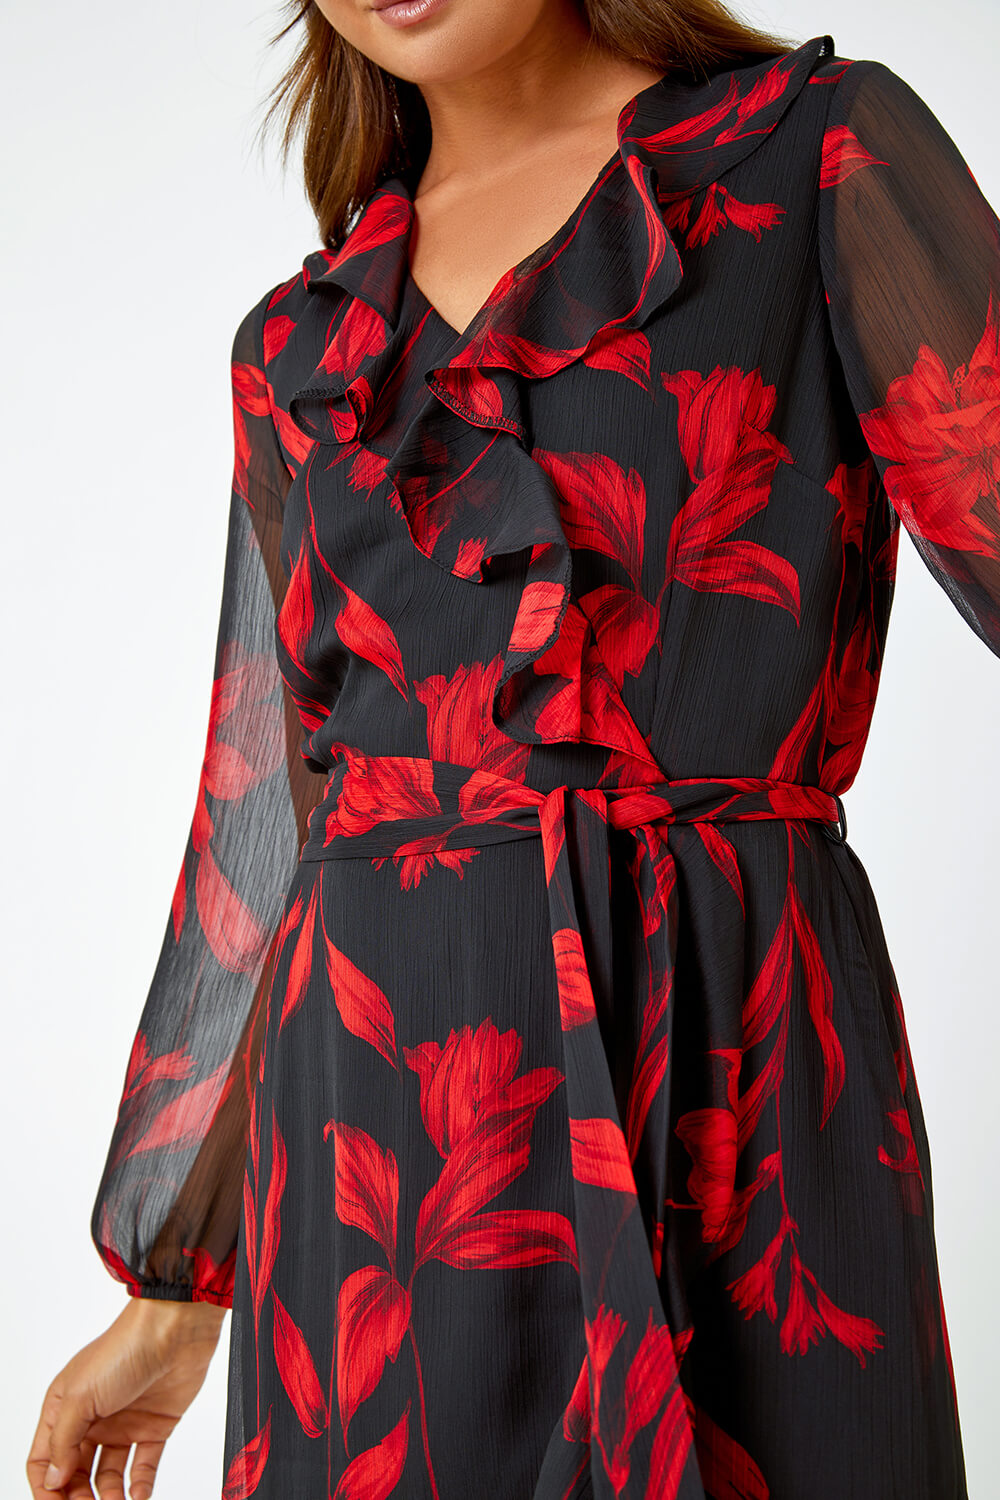 Red Floral Chiffon Frill Wrap Dress, Image 5 of 5